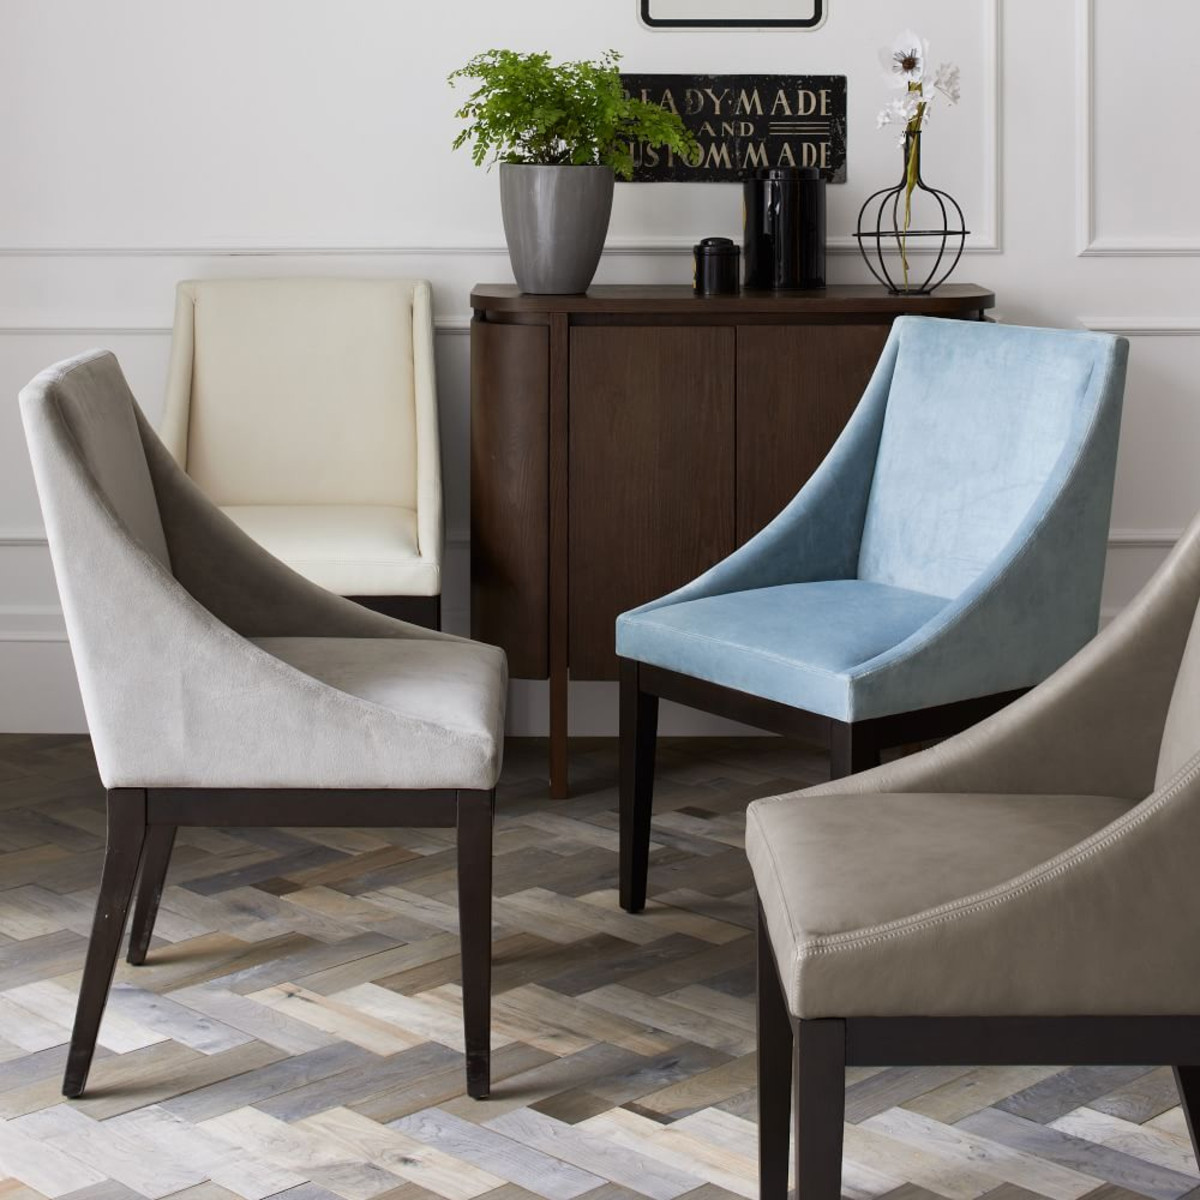 Best ideas about West Elm Chair
. Save or Pin Curved Leather Chair Now.